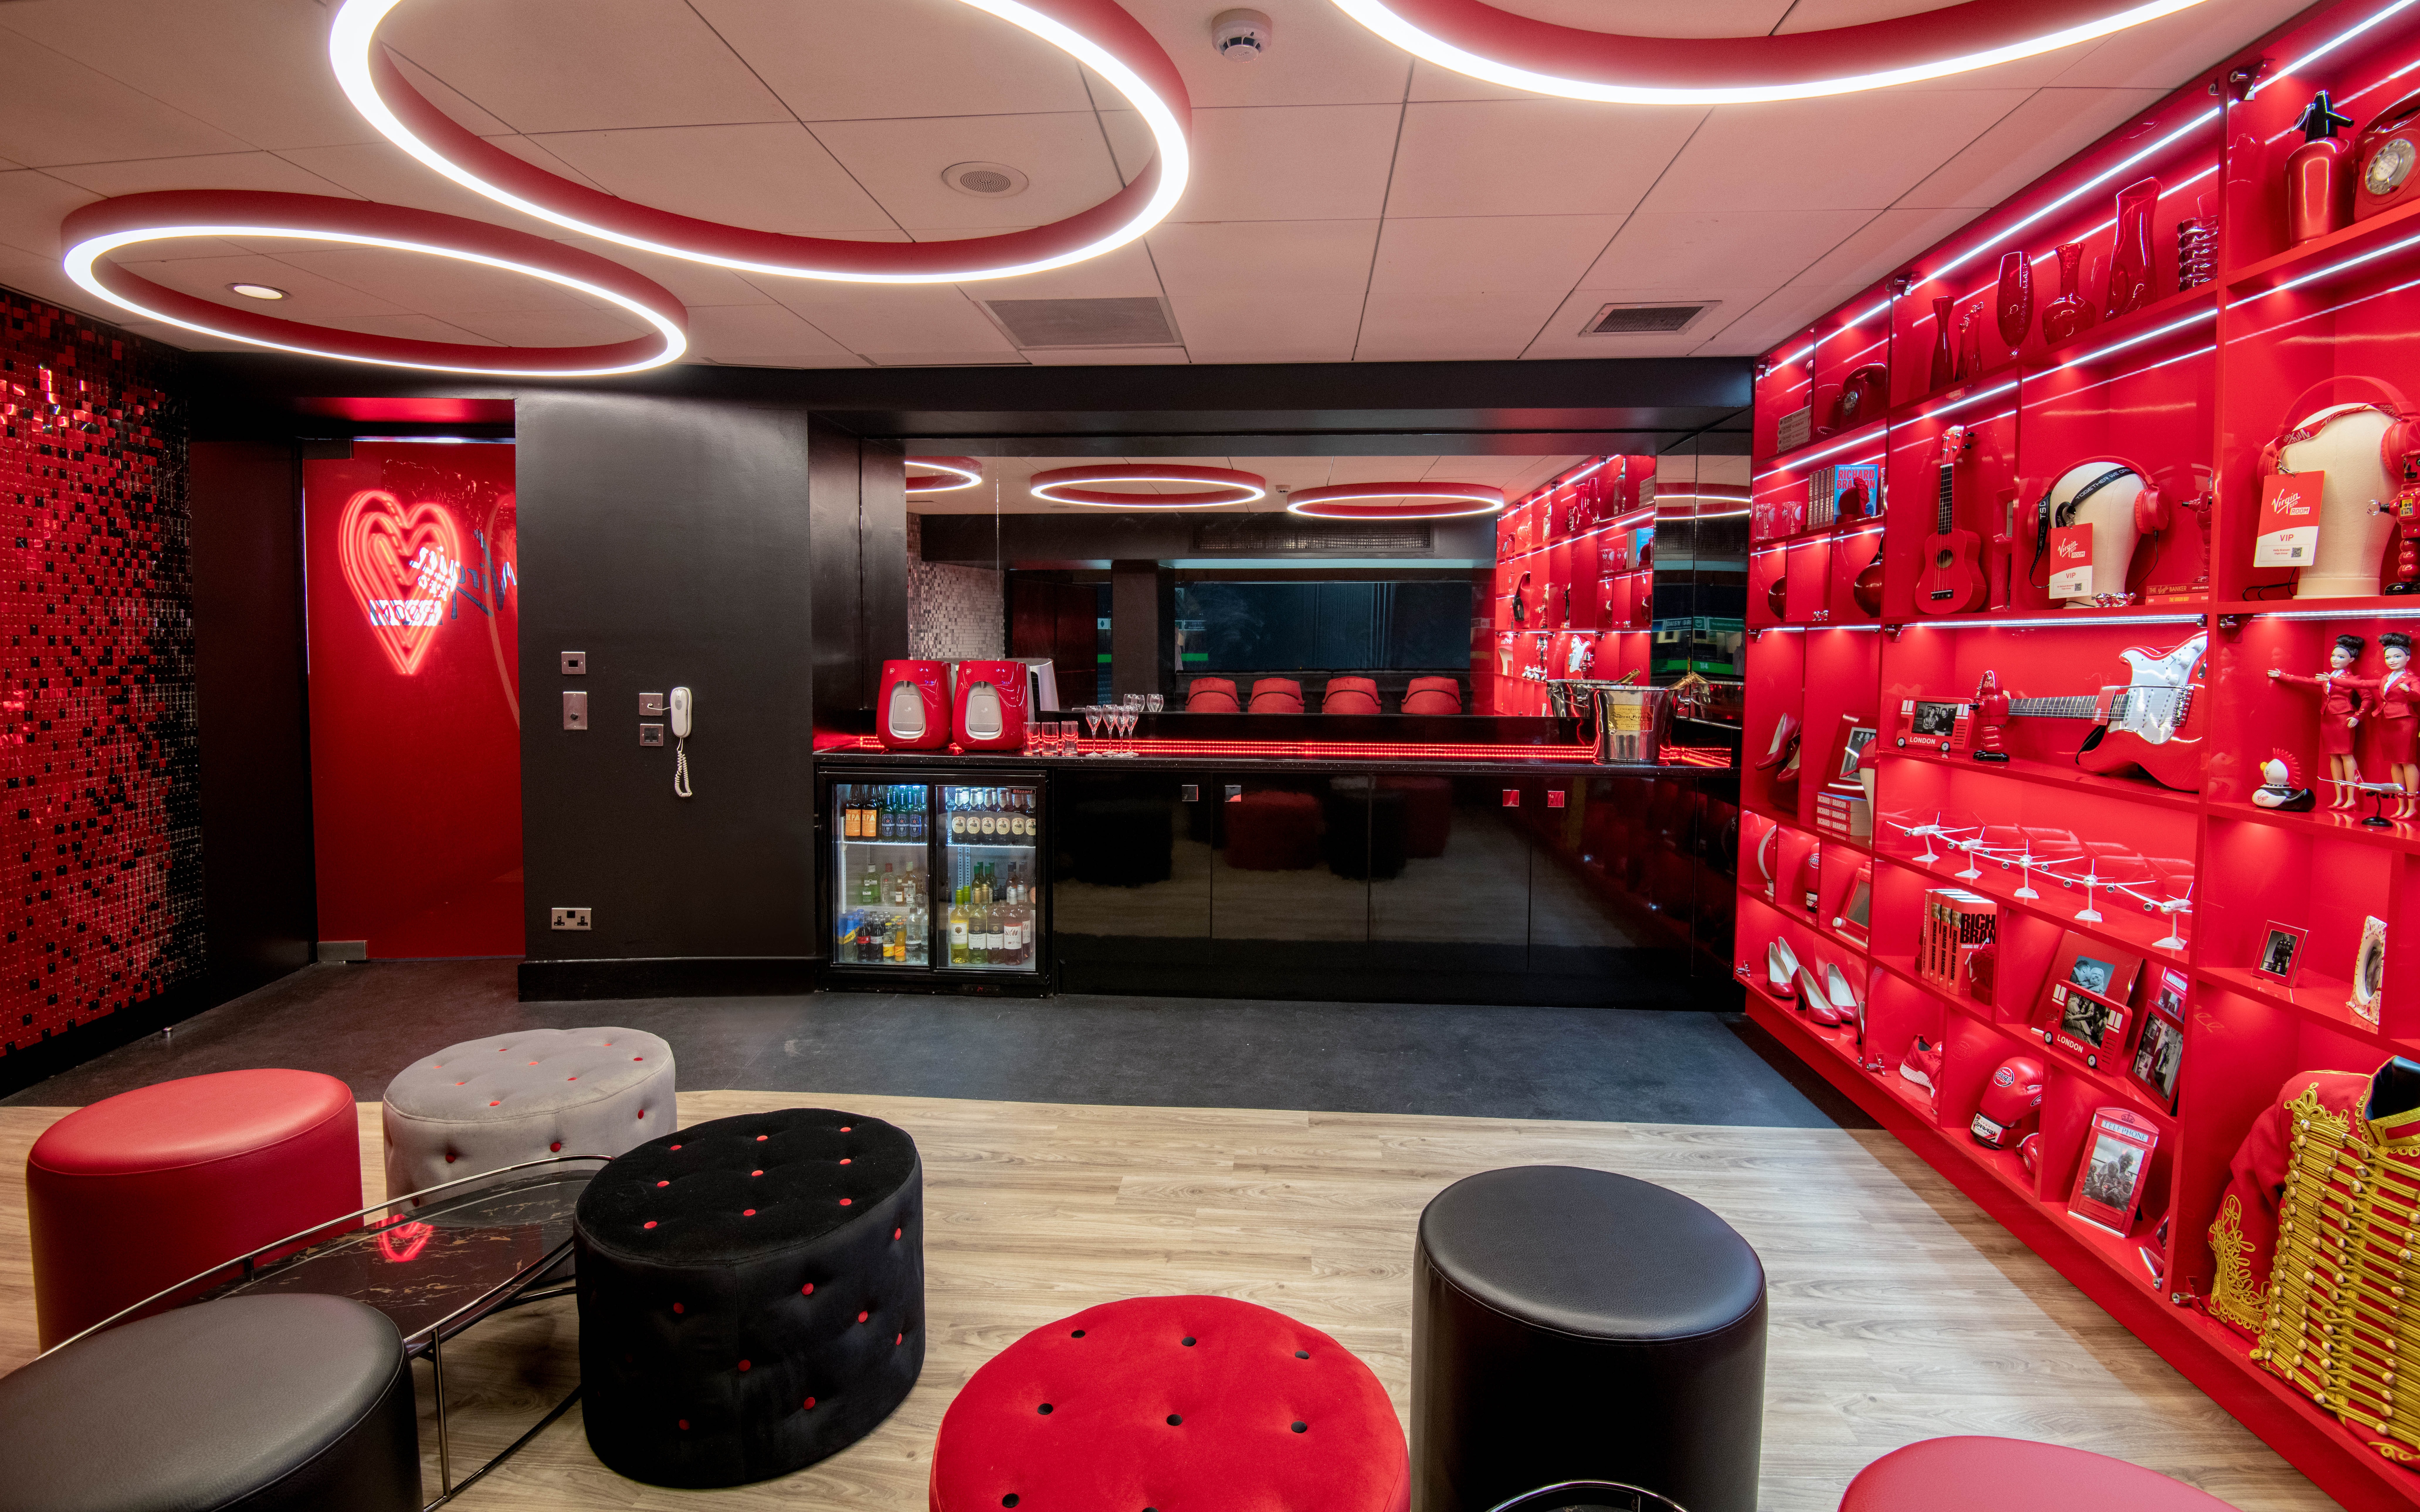 Image of the interior of the Virgin Red Room at Manchester's AO Arena. 